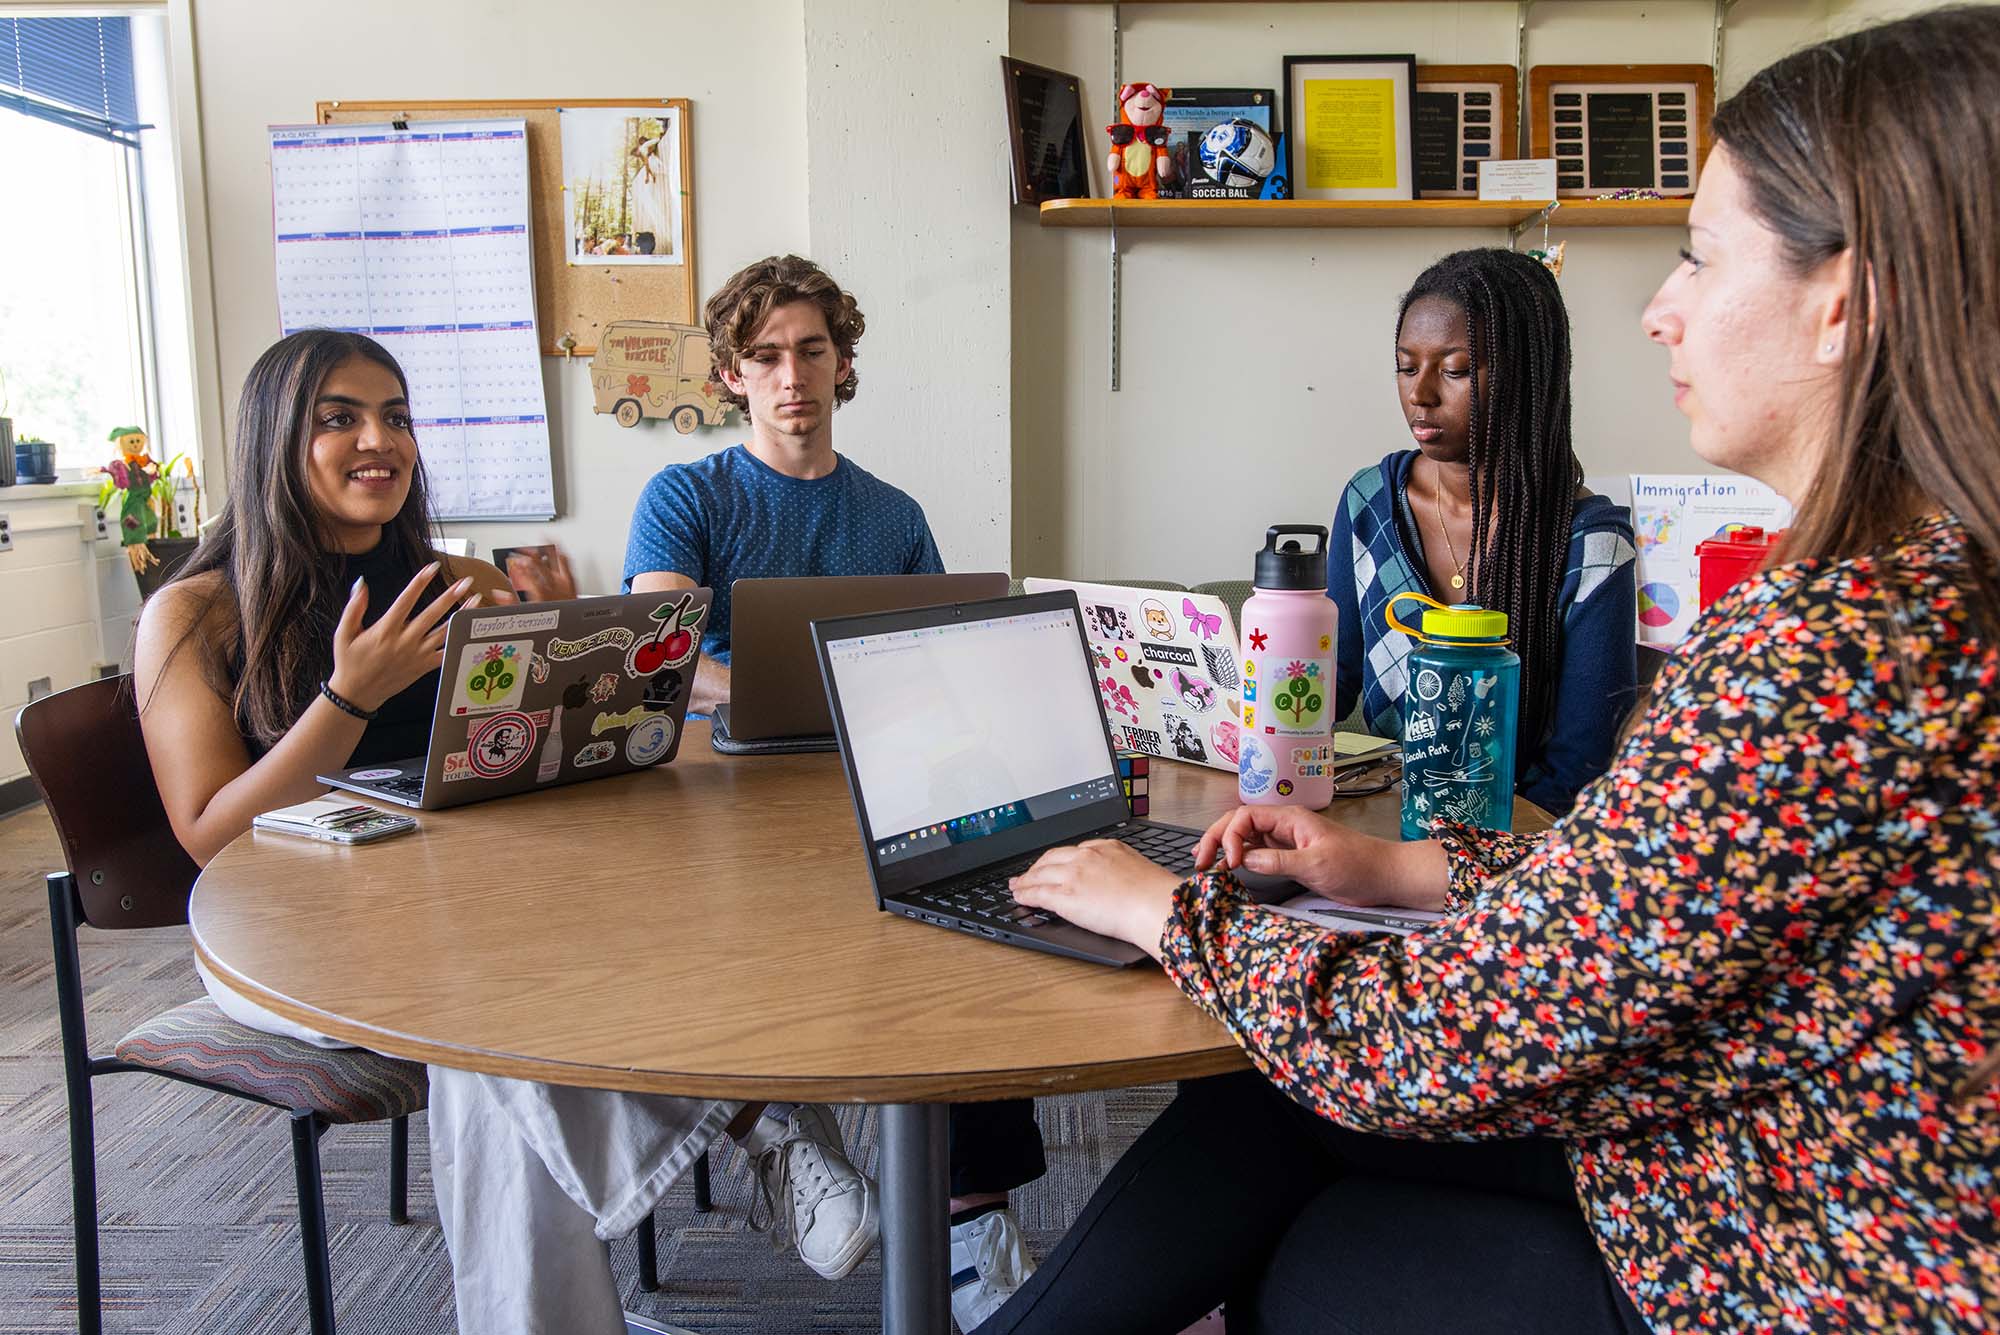 Photo: Four people, three college students and their advisor, sit at a round, wooden table. They work and look at individual laptop screens as they smile and collaborate.